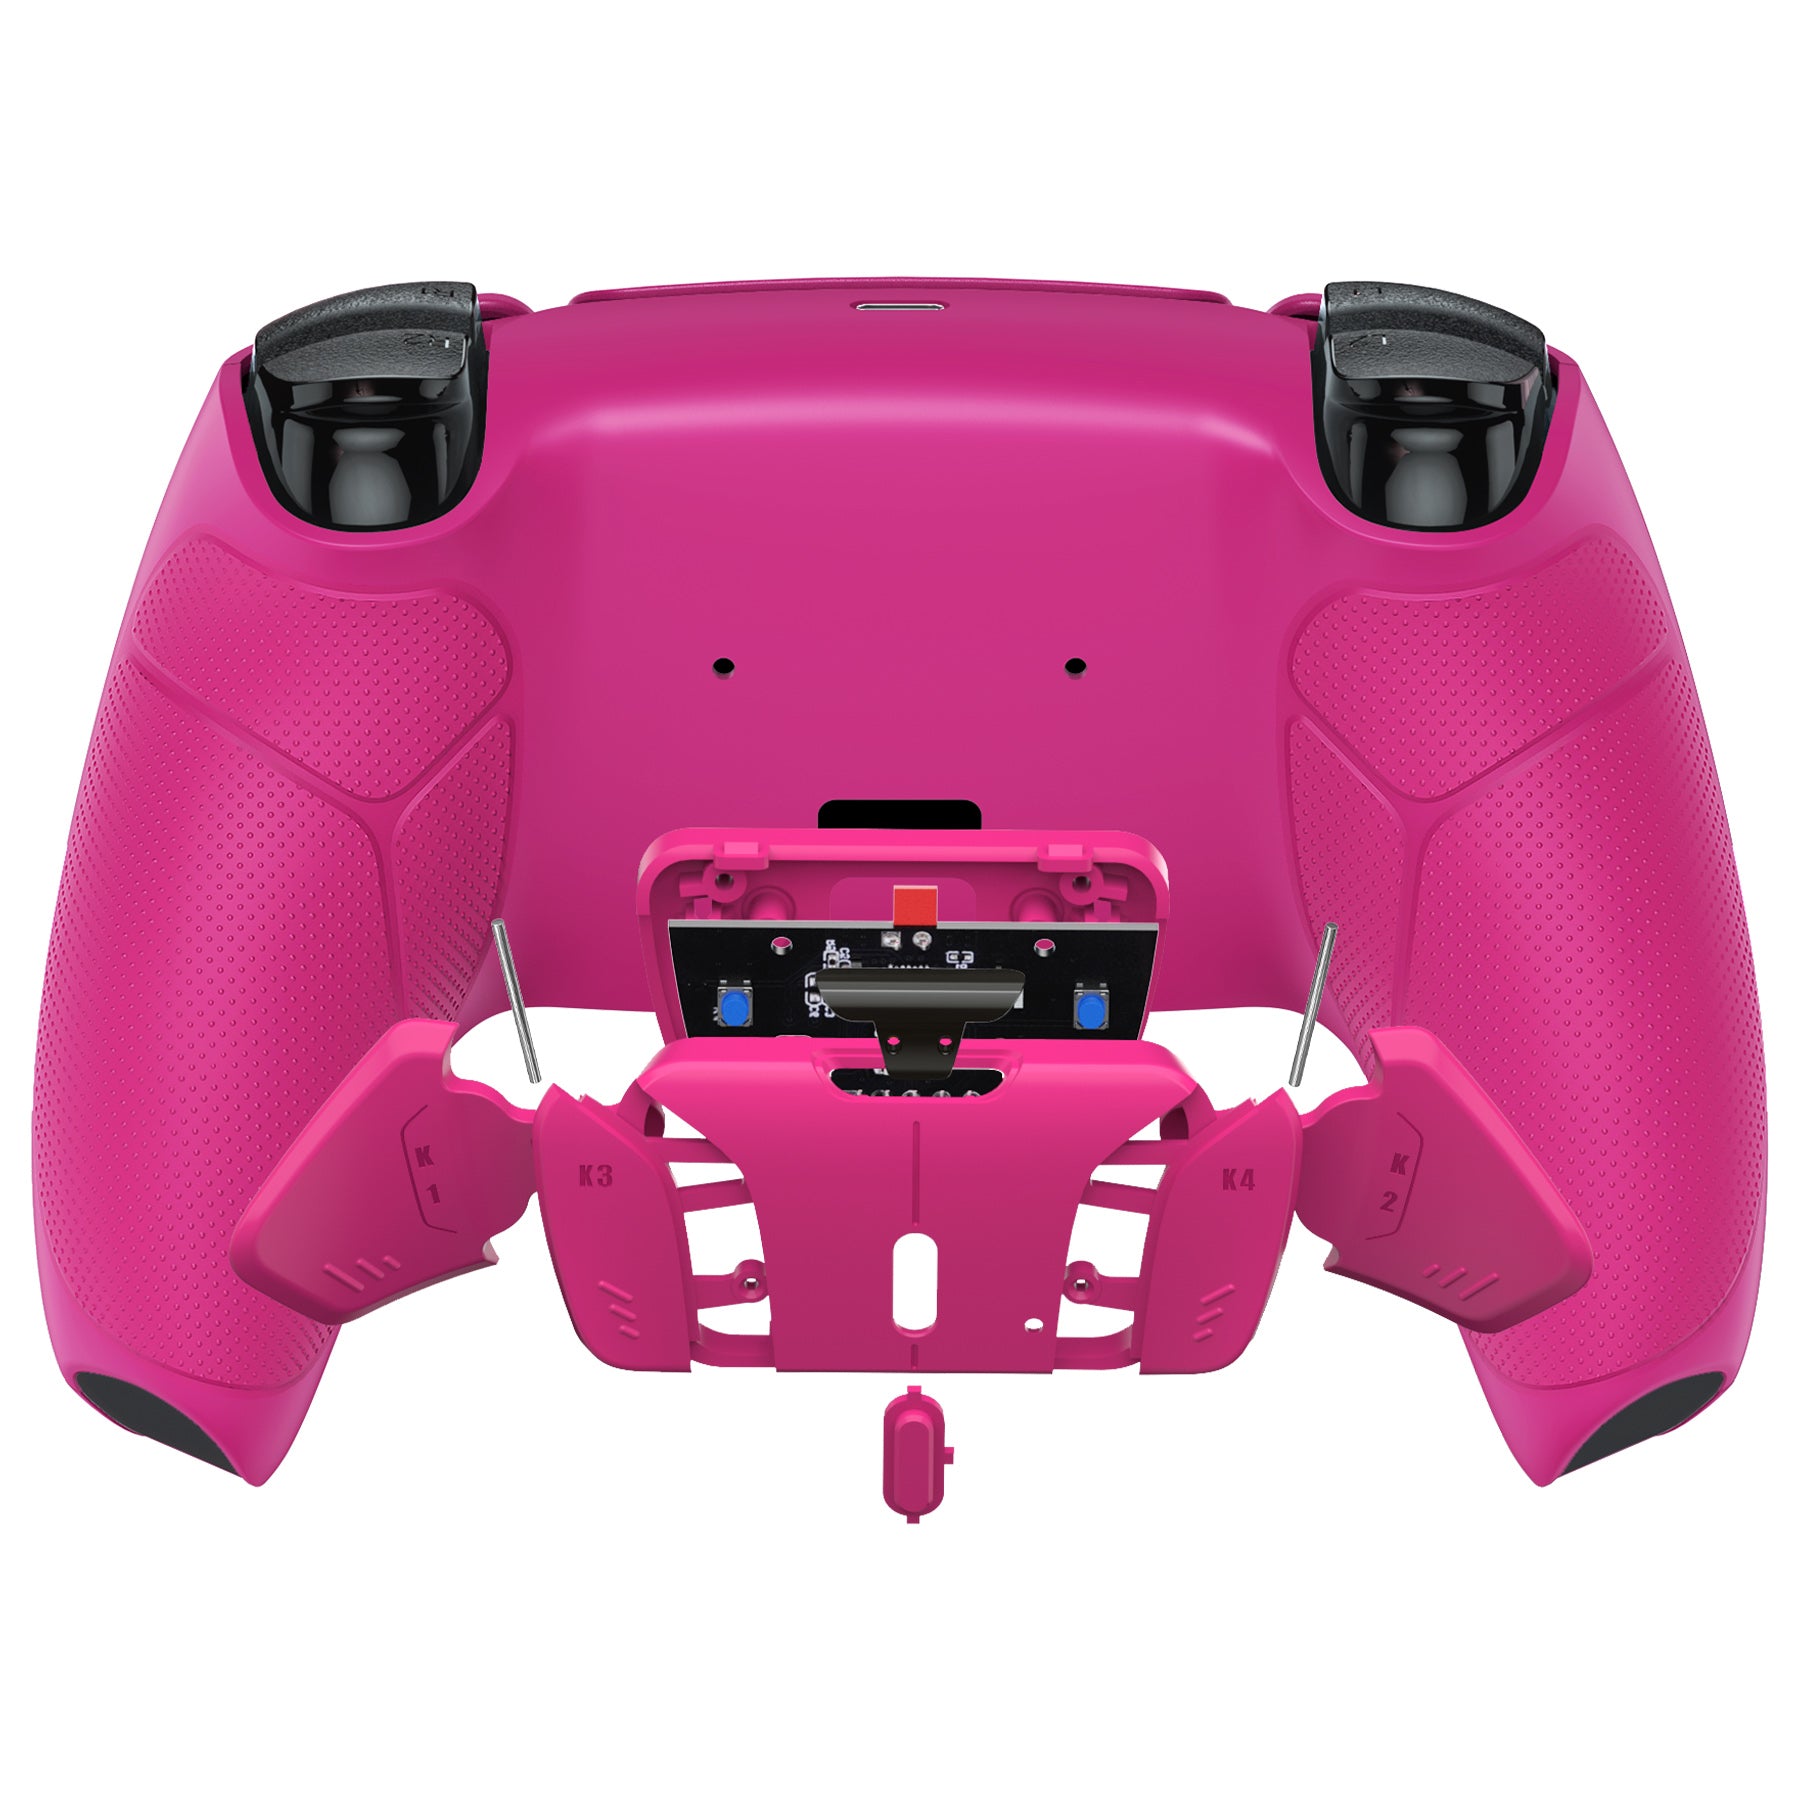  PS5 Controller Styling Kit (Includes Faceplate & Thumb Grips) -  Pink Sparkle (PS5) : iMP Tech: Videojuegos